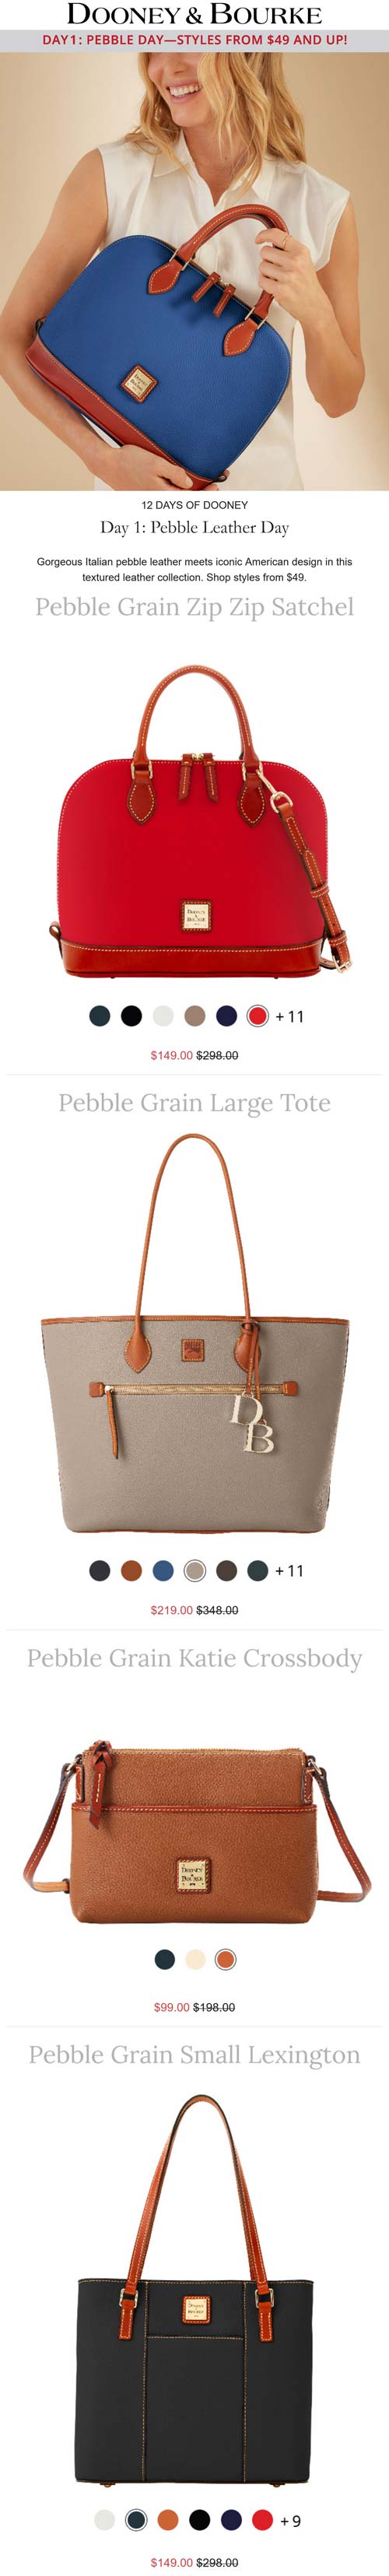 Pebble bags start at $49 today during the 12 days of Dooney & Bourke #dooneybourke